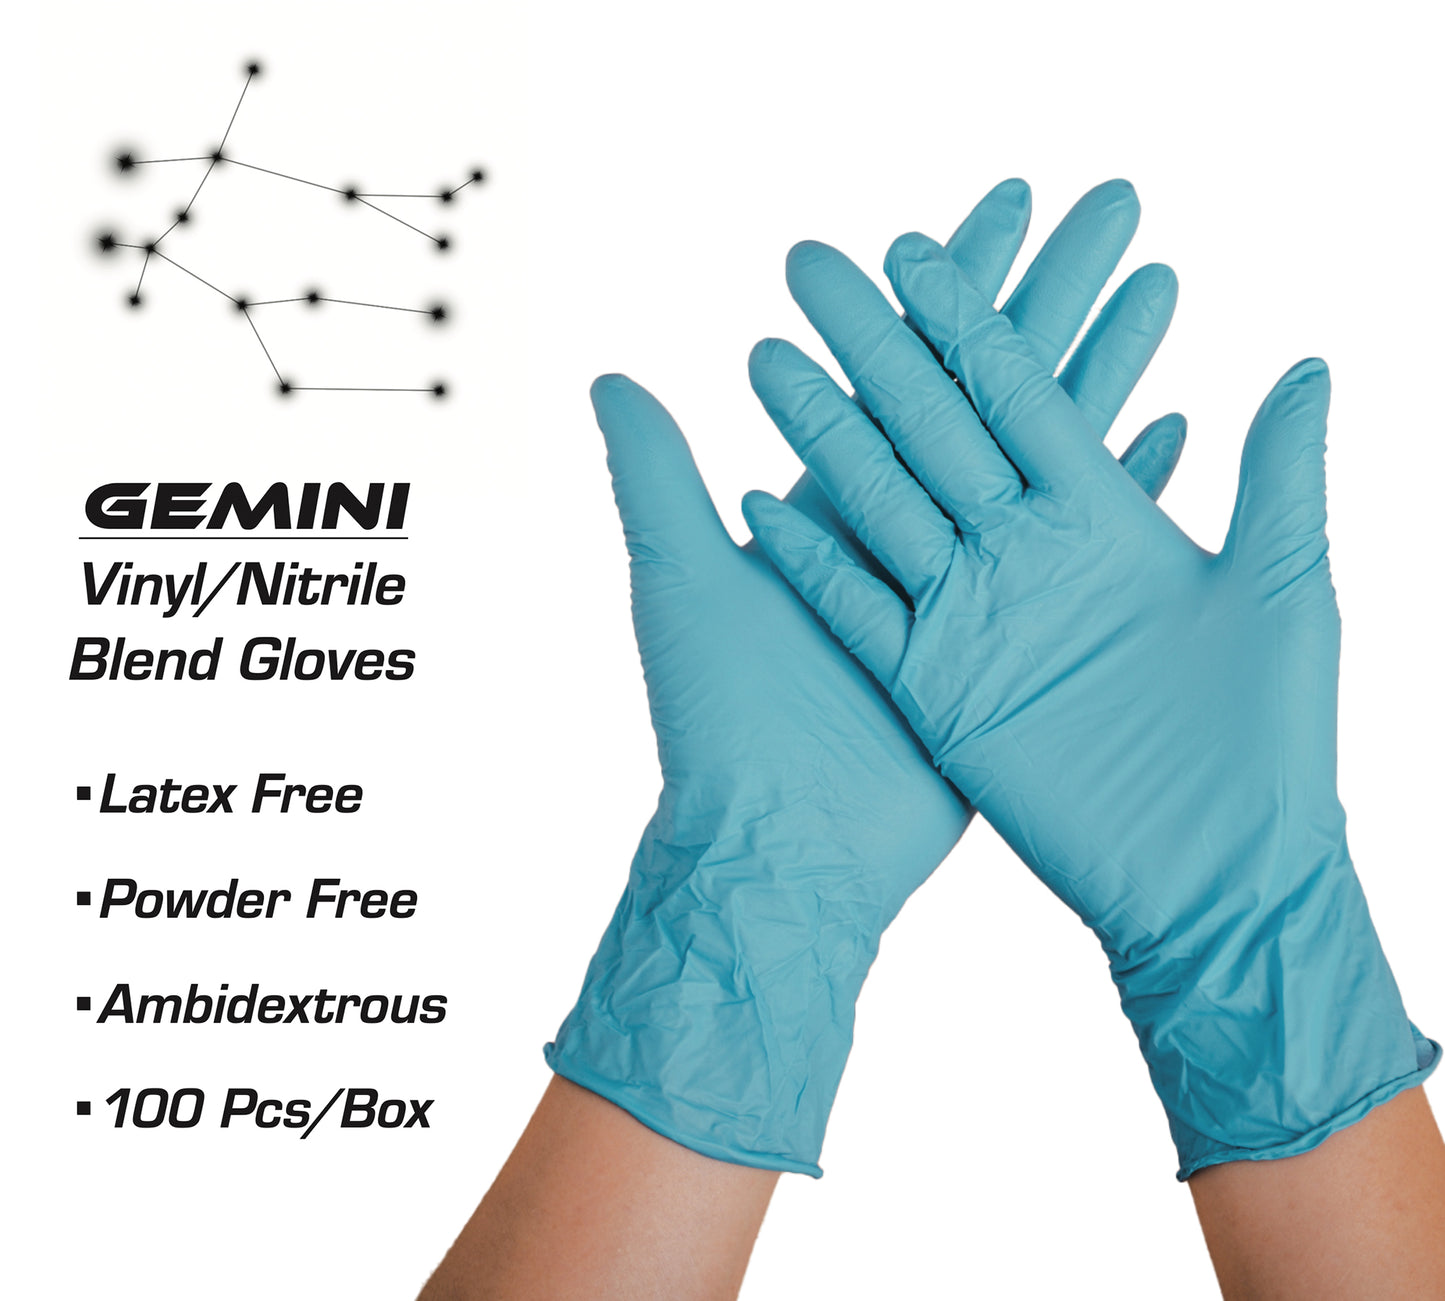 Gemini Disposable Food Prep Gloves – Blue Nitrile Vinyl Blend Glove, Latex Free, For Cleaning, Cooking, Kitchen, Tattoo